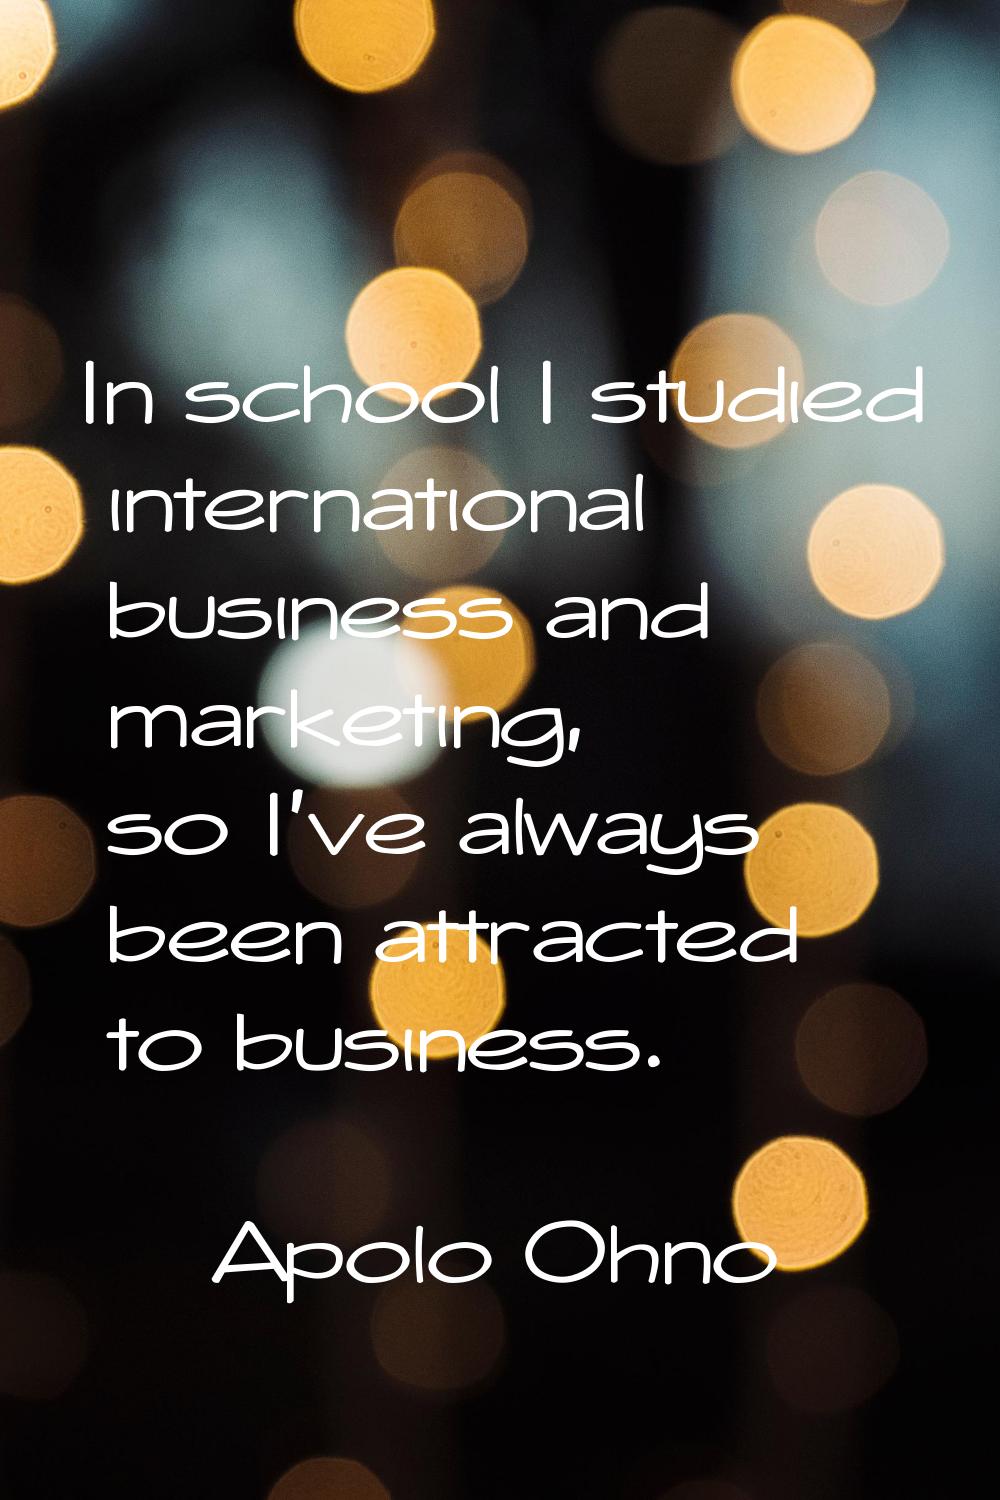 In school I studied international business and marketing, so I've always been attracted to business